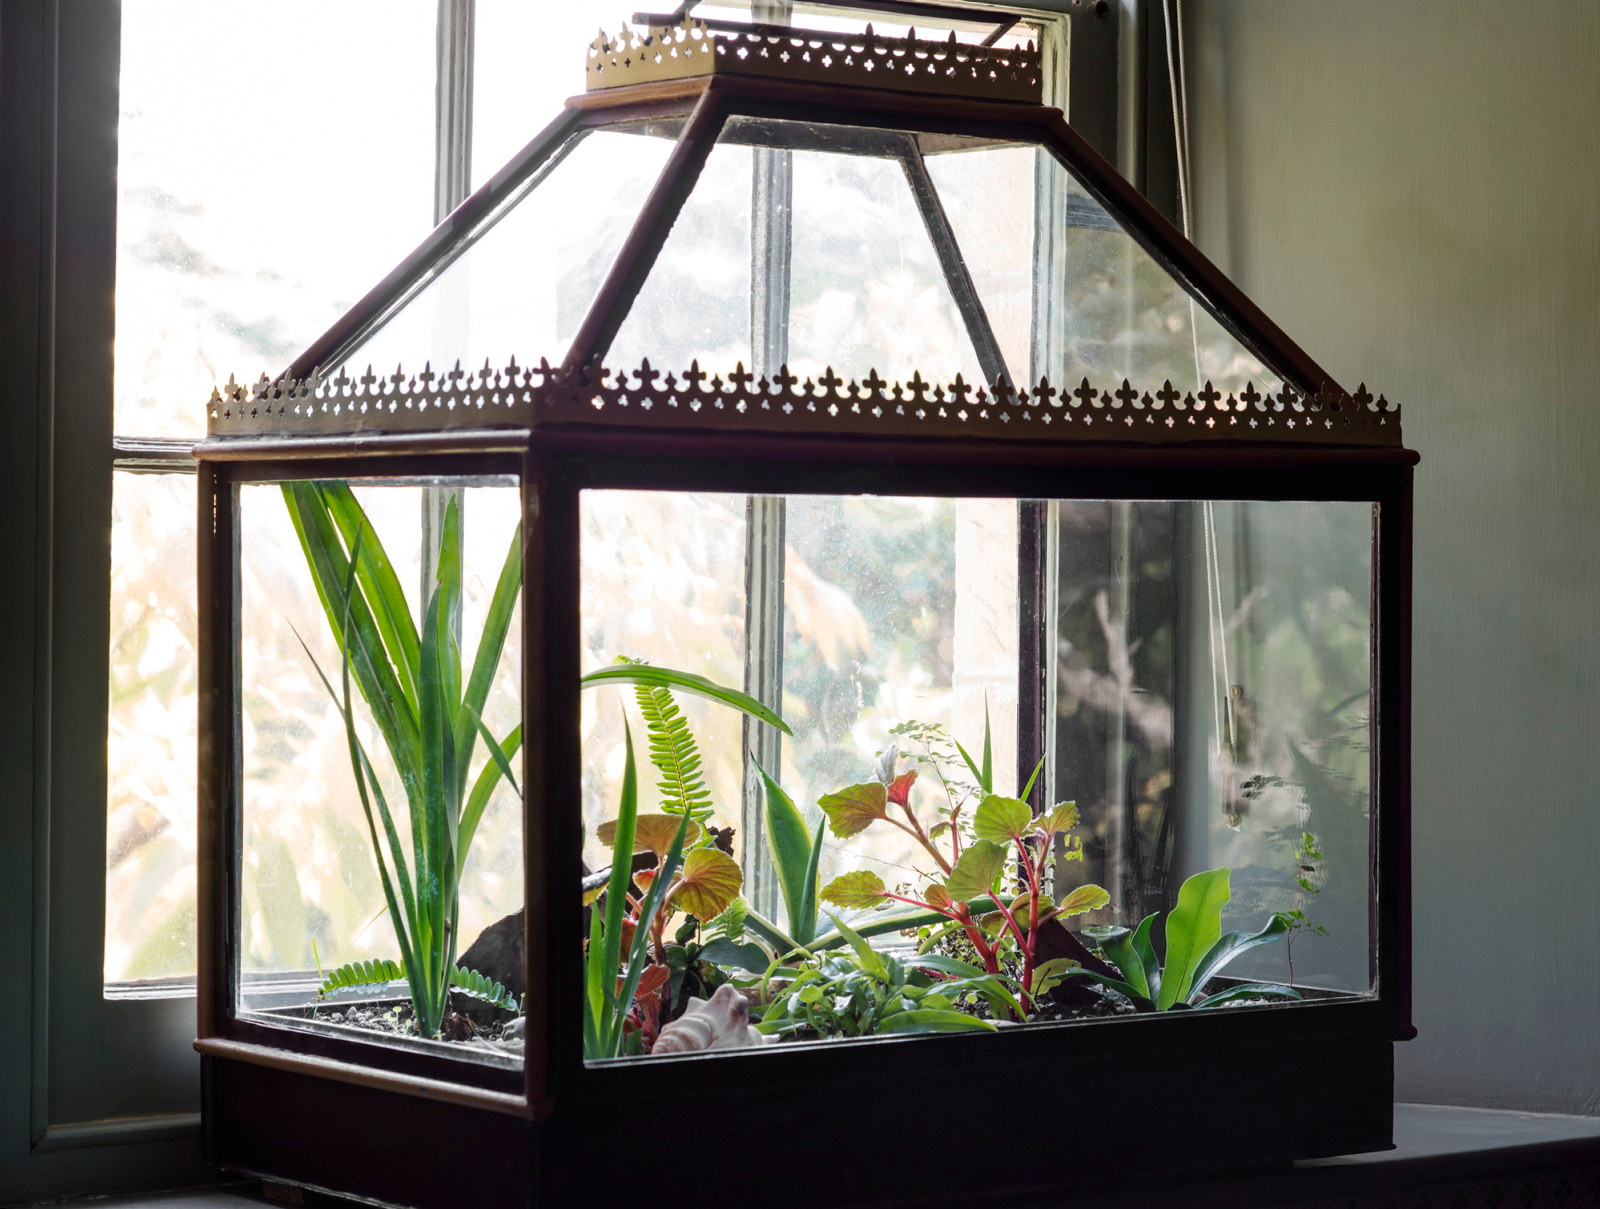 Glass Wardian Case at Vaucluse House , used to transport and display plants and ferns